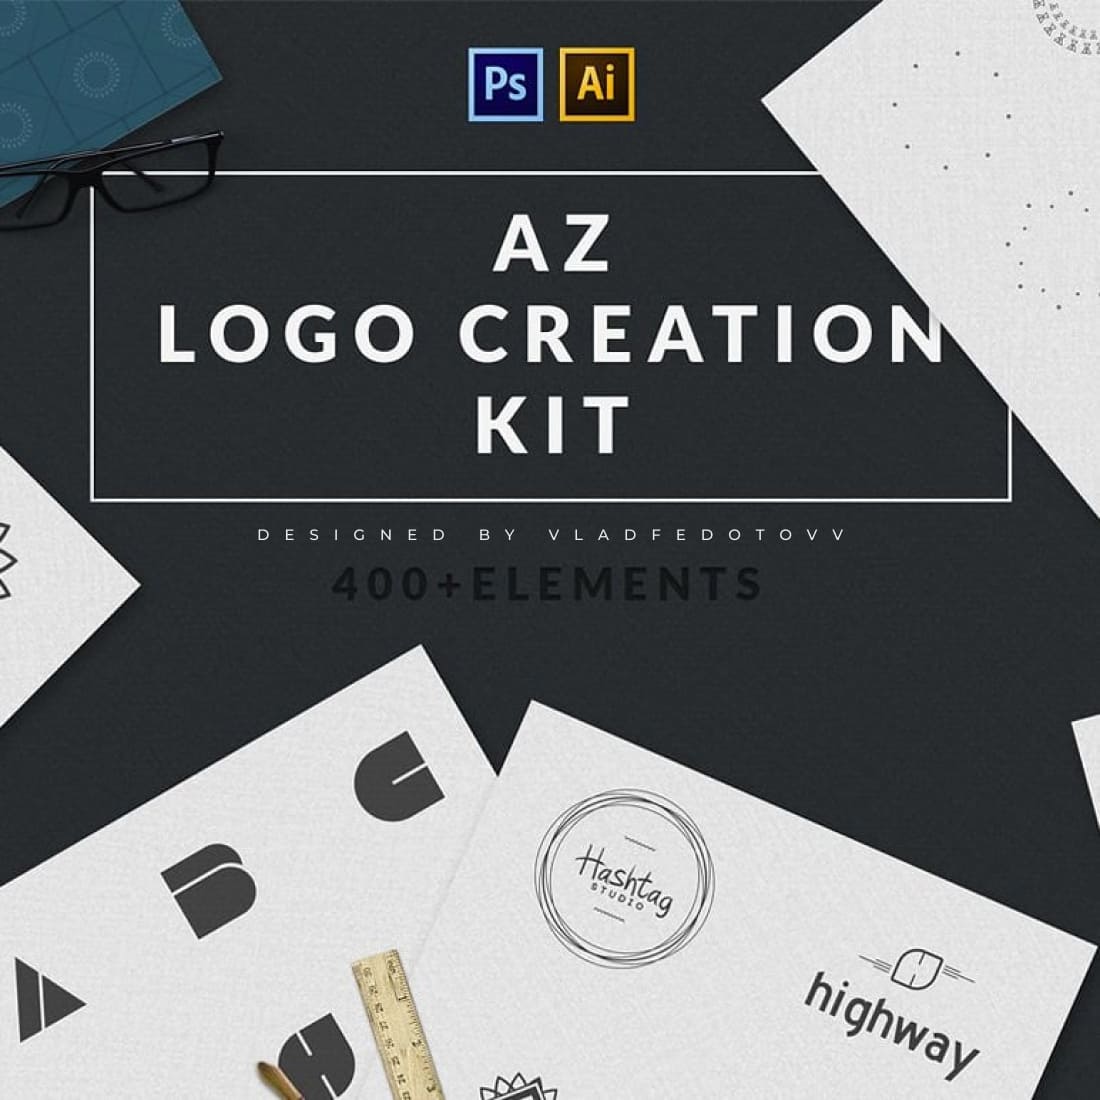 Logo Creation Kit 409 Elements – just 5 cover image.